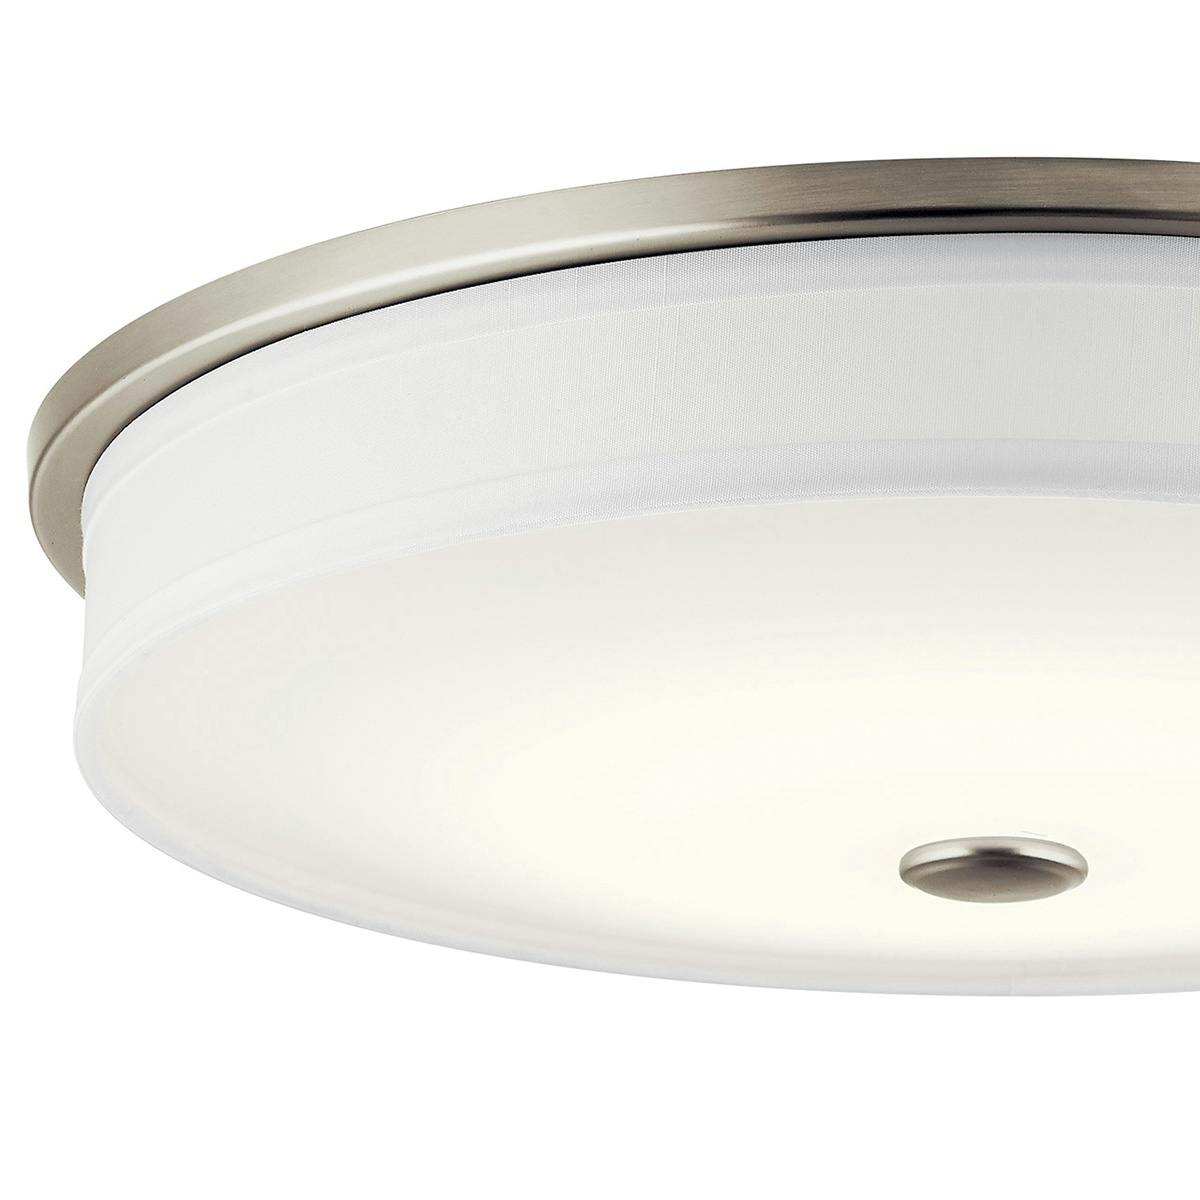 Close up view of the Ceiling Space 17.25" Flush Mount Nickel on a white background